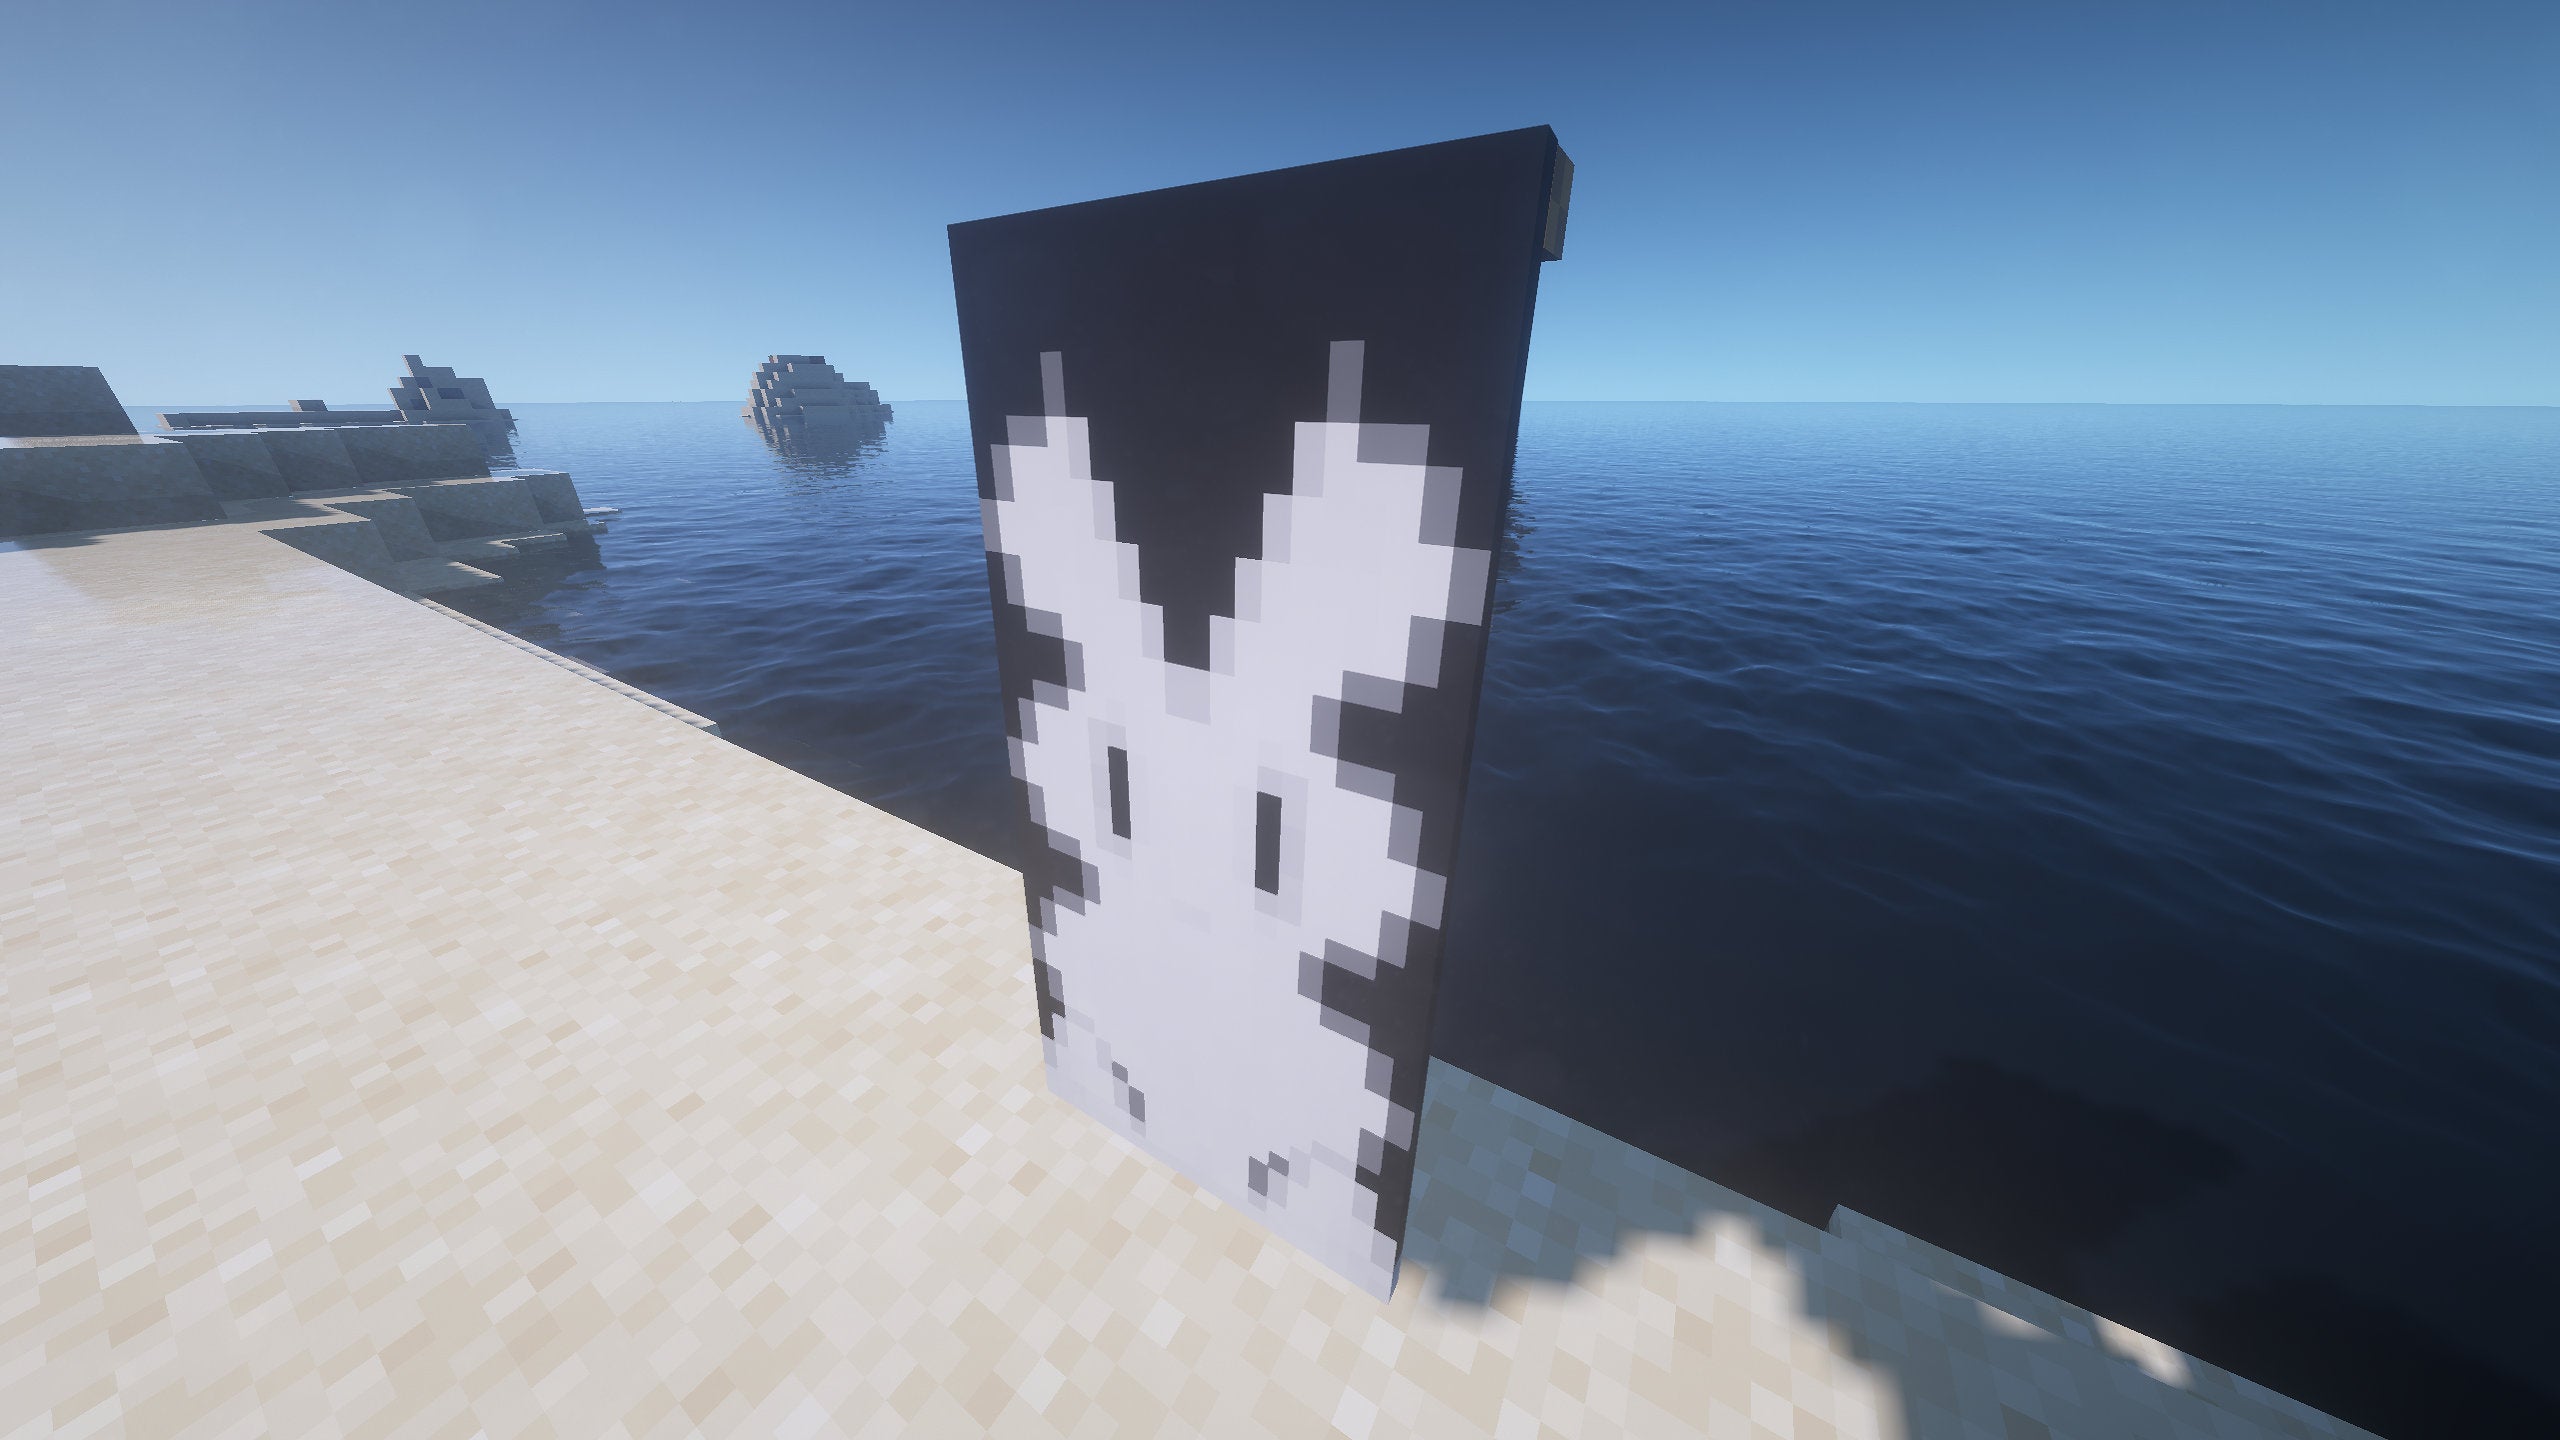 A rabbit Banner in Minecraft, placed in the ground by the coast.